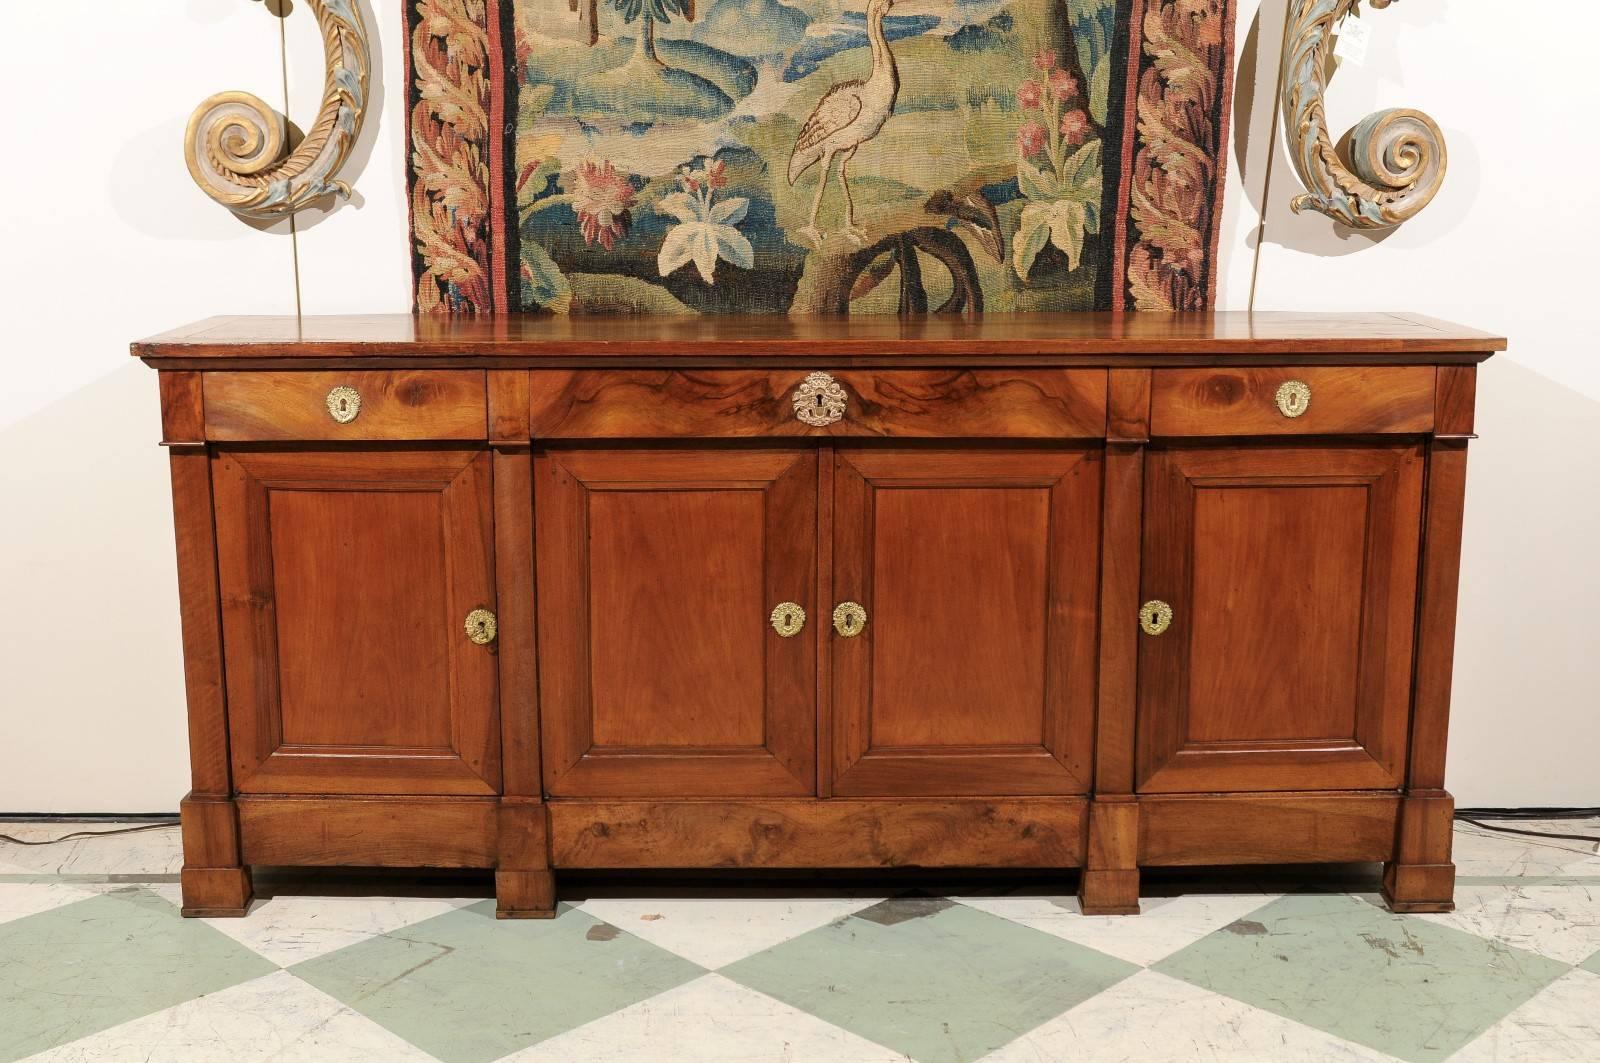 Early 19th century, French Empire Enfilade in walnut and fruitwood with three drawers and four cabinets below.